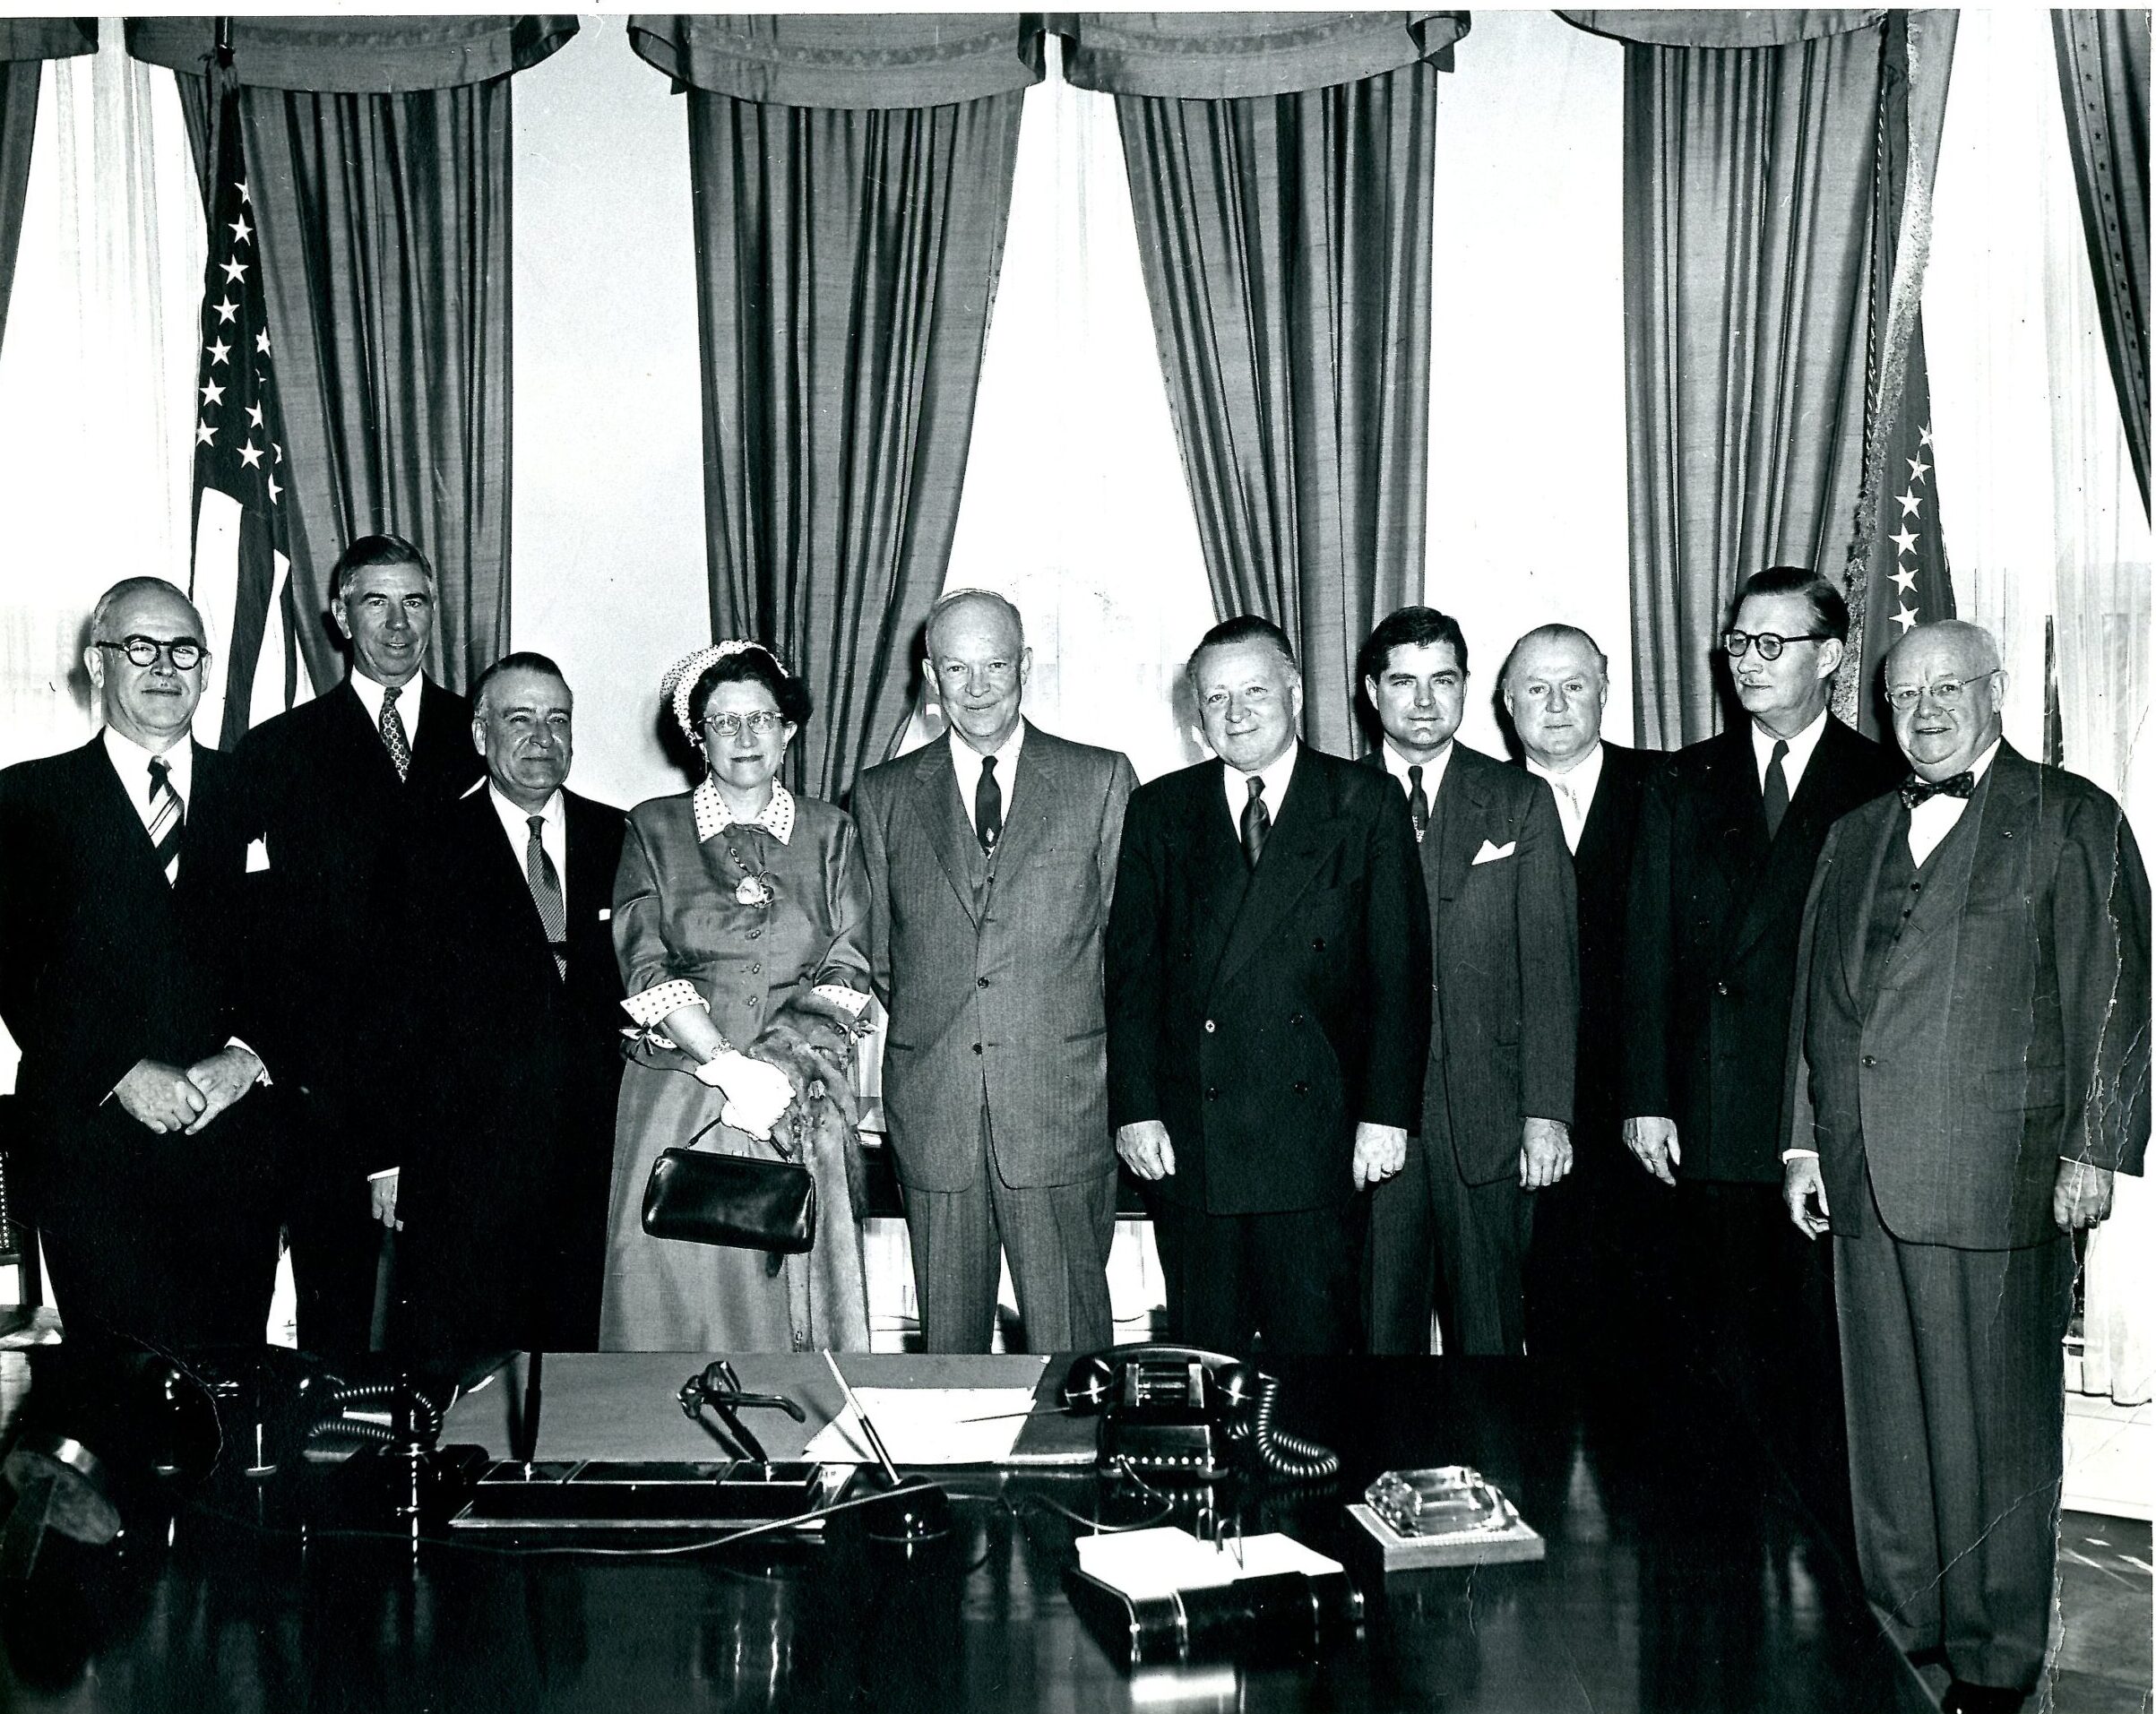 A group portrait showing several men wearing suits as well as Consuelo Northrop Bailey and President Eisenhower in the center. Everyone is looking at the camera and smiling. The President’s desk is visible in the foreground while two flags and several window treatments are apparent in the background.